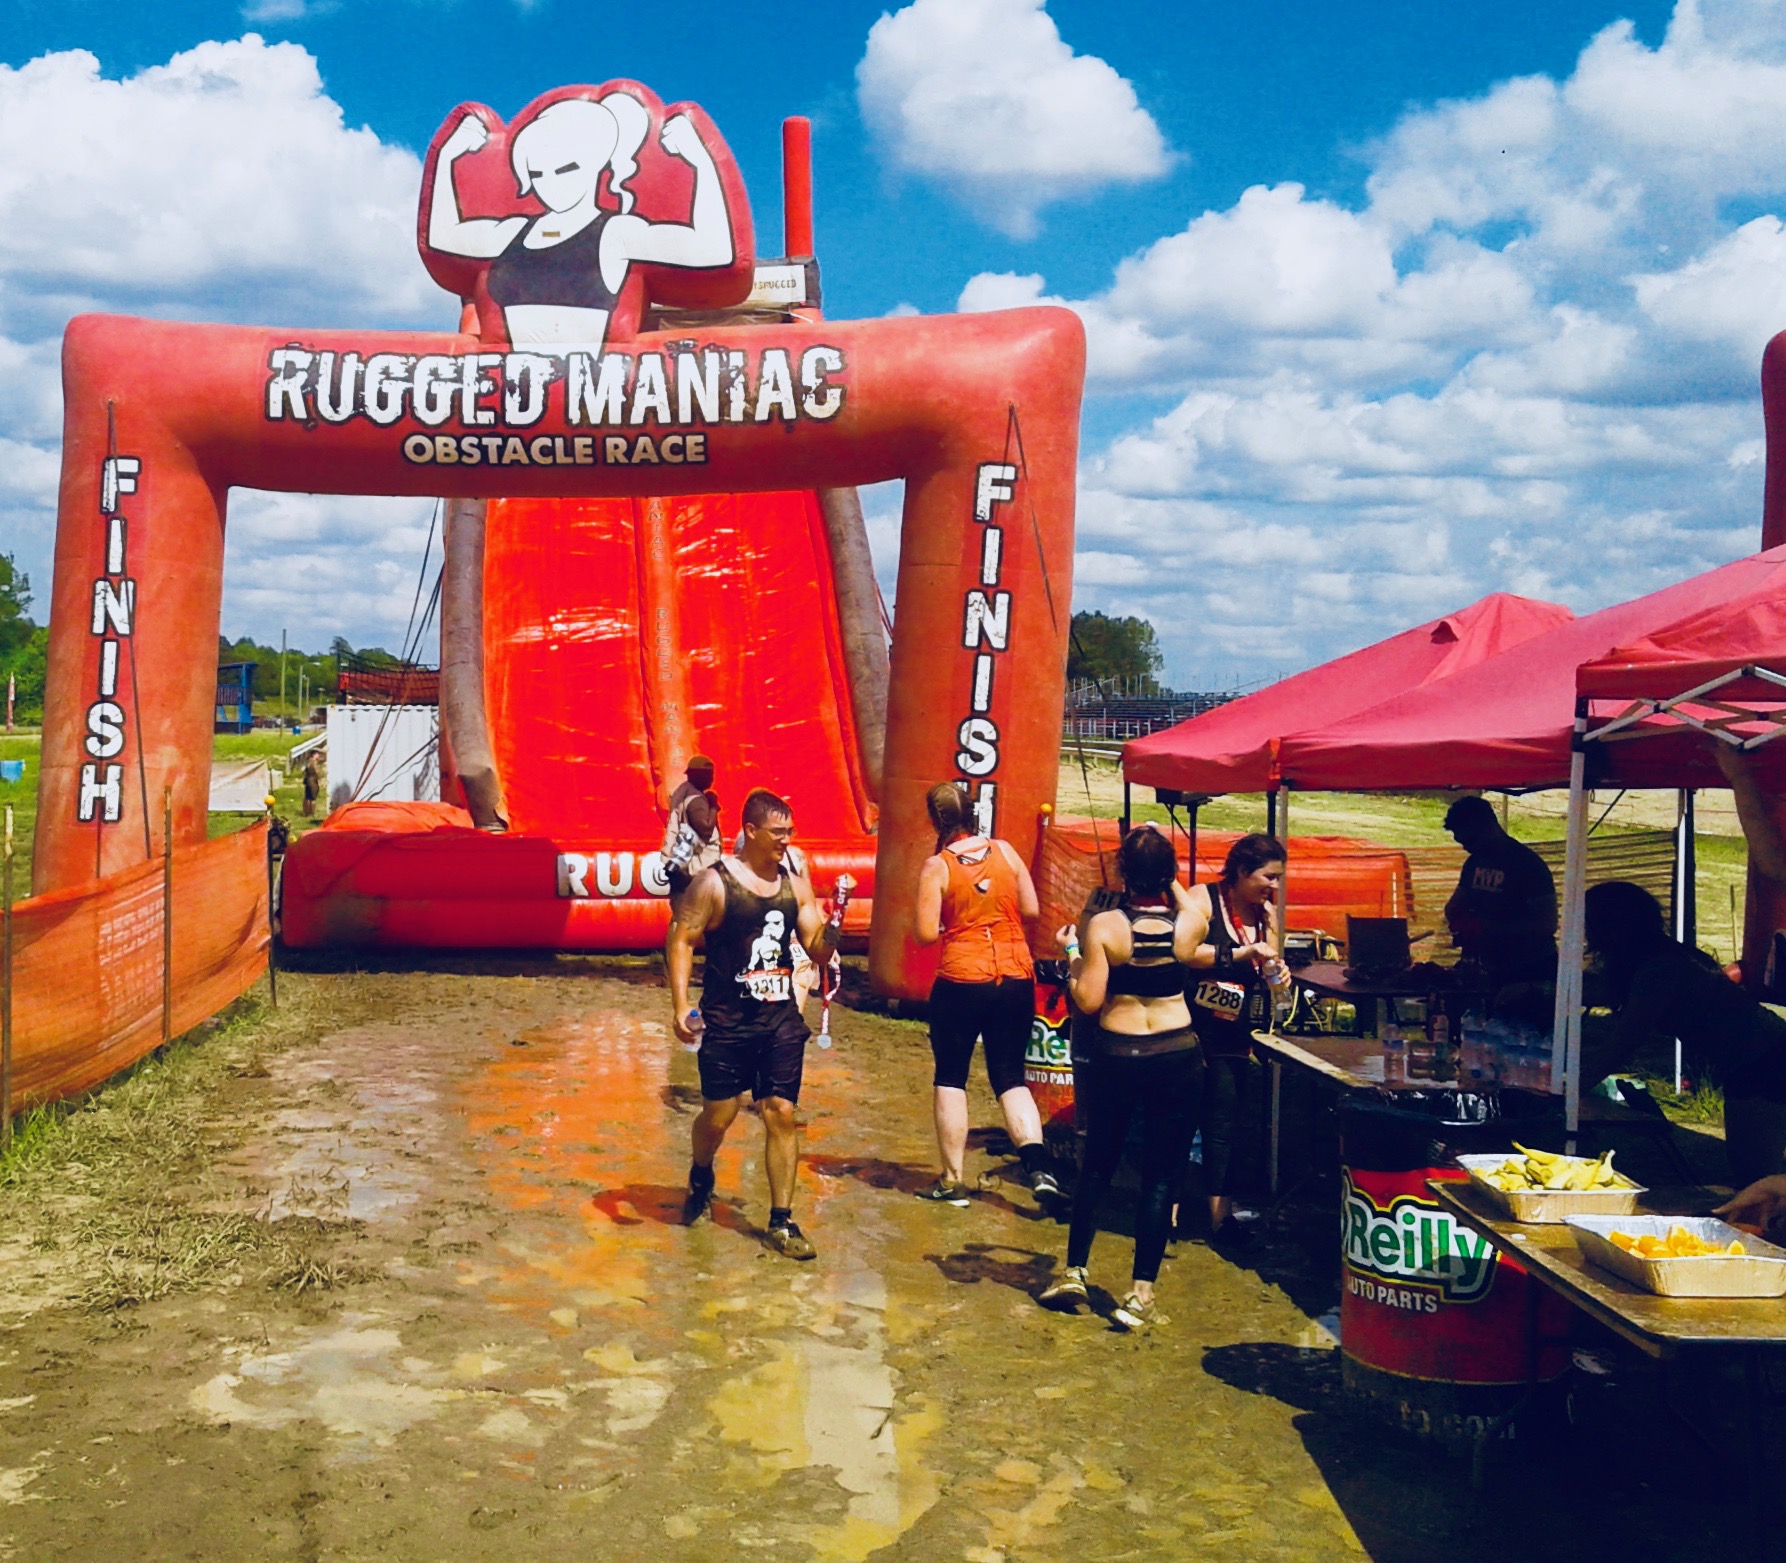 Rugged Maniac X Archives Mud Run Ocr Obstacle Course Race Ninja Warrior Guide